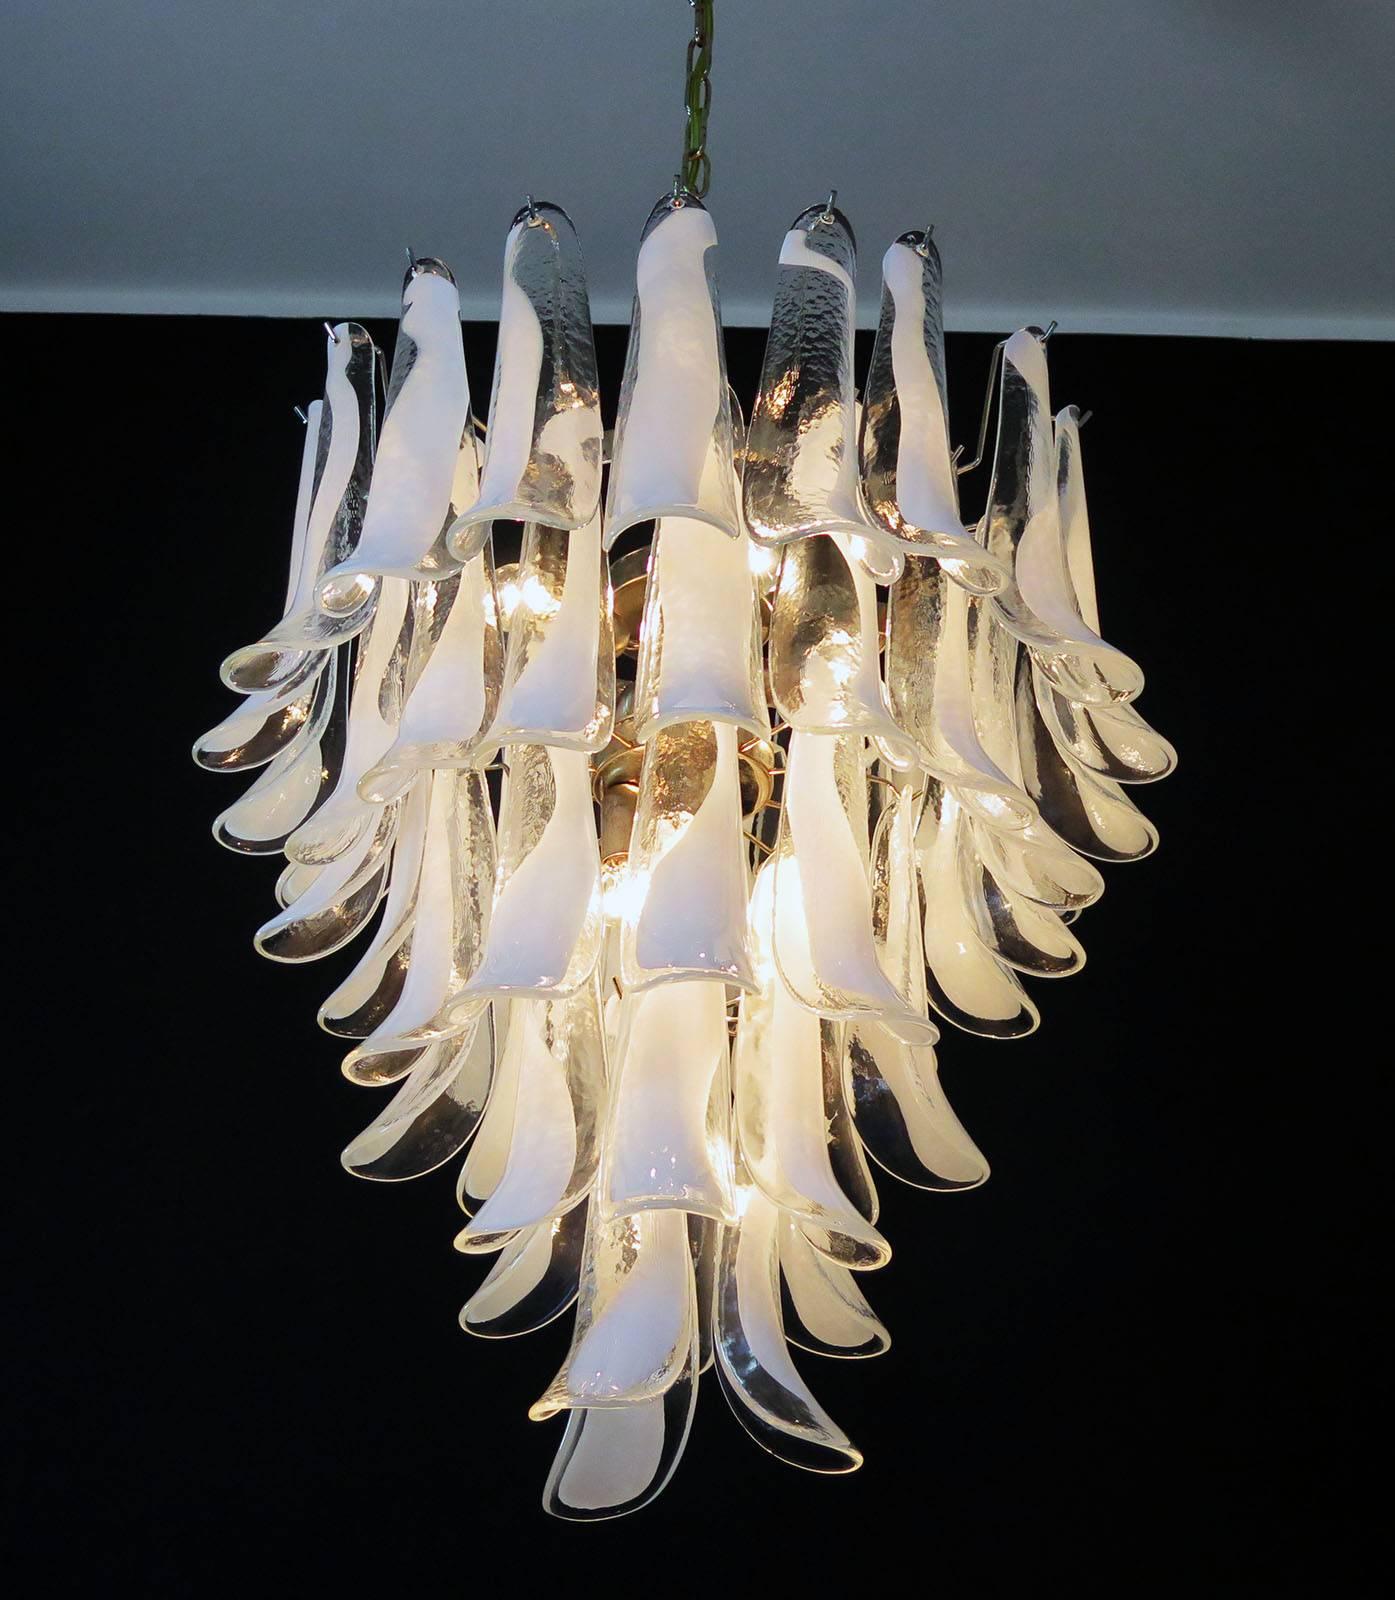 Pair of Huge Italian Vintage Murano Chandelier Made by 52 Glass Petals, 1970s For Sale 2